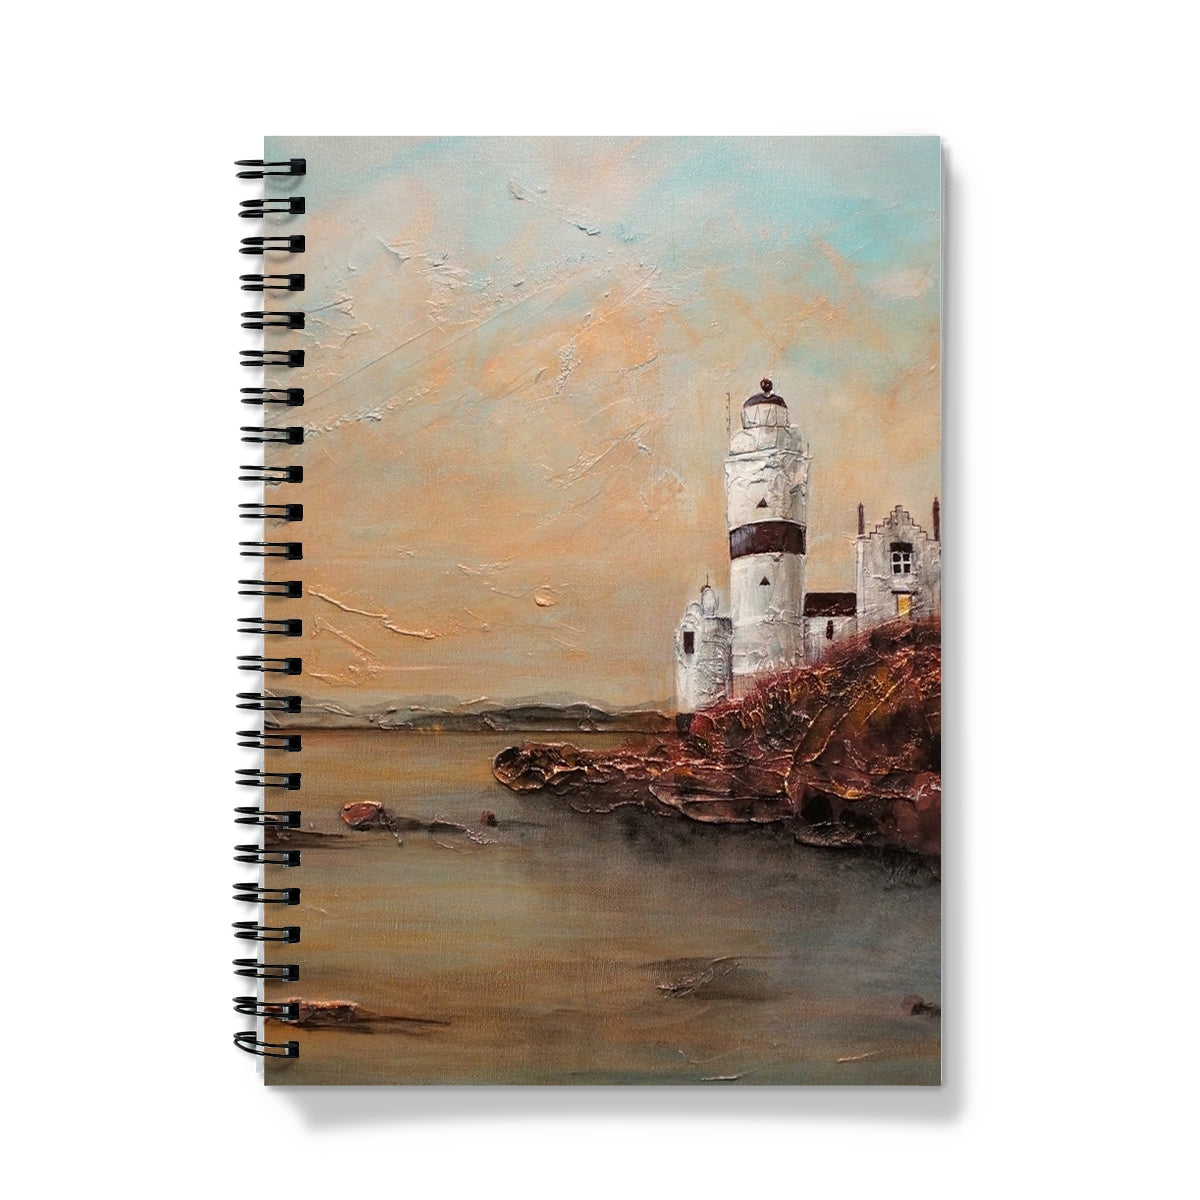 Cloch Lighthouse Dawn Art Gifts Notebook-Journals & Notebooks-River Clyde Art Gallery-A5-Graph-Paintings, Prints, Homeware, Art Gifts From Scotland By Scottish Artist Kevin Hunter